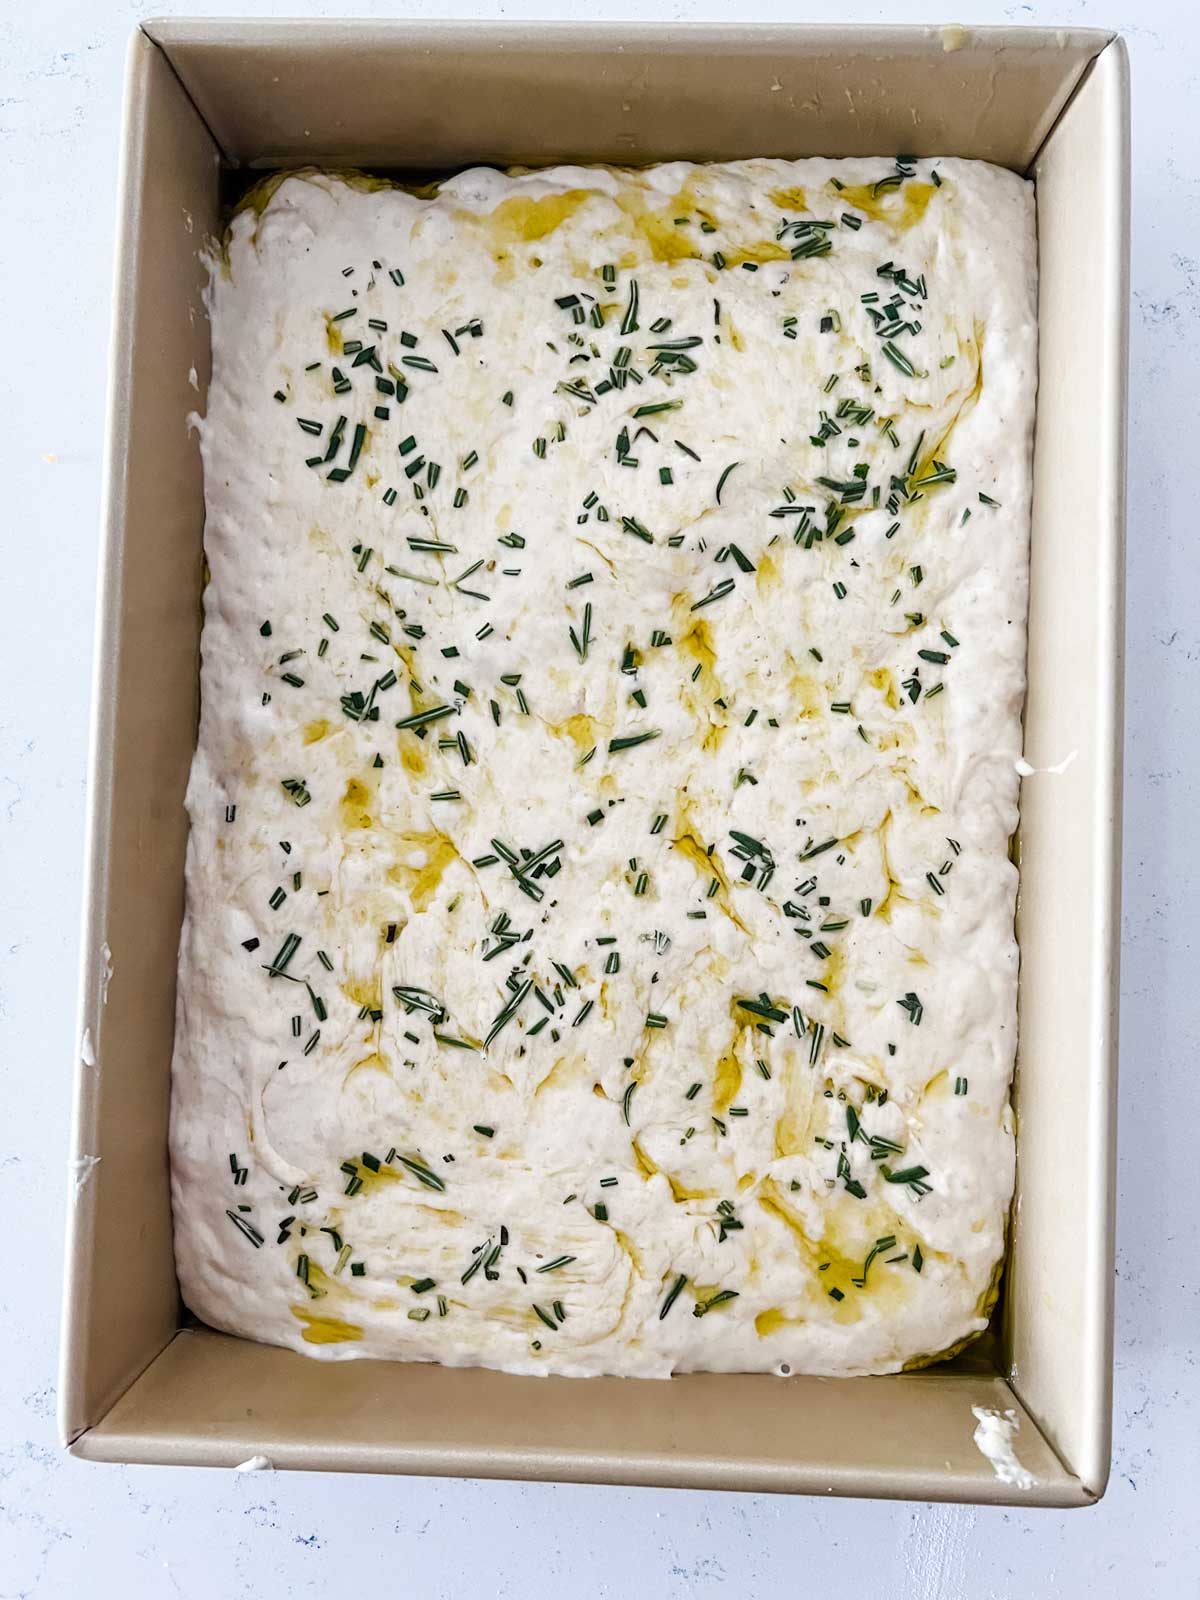 Uncooked focaccia bread that has just rested for 15 minutes.